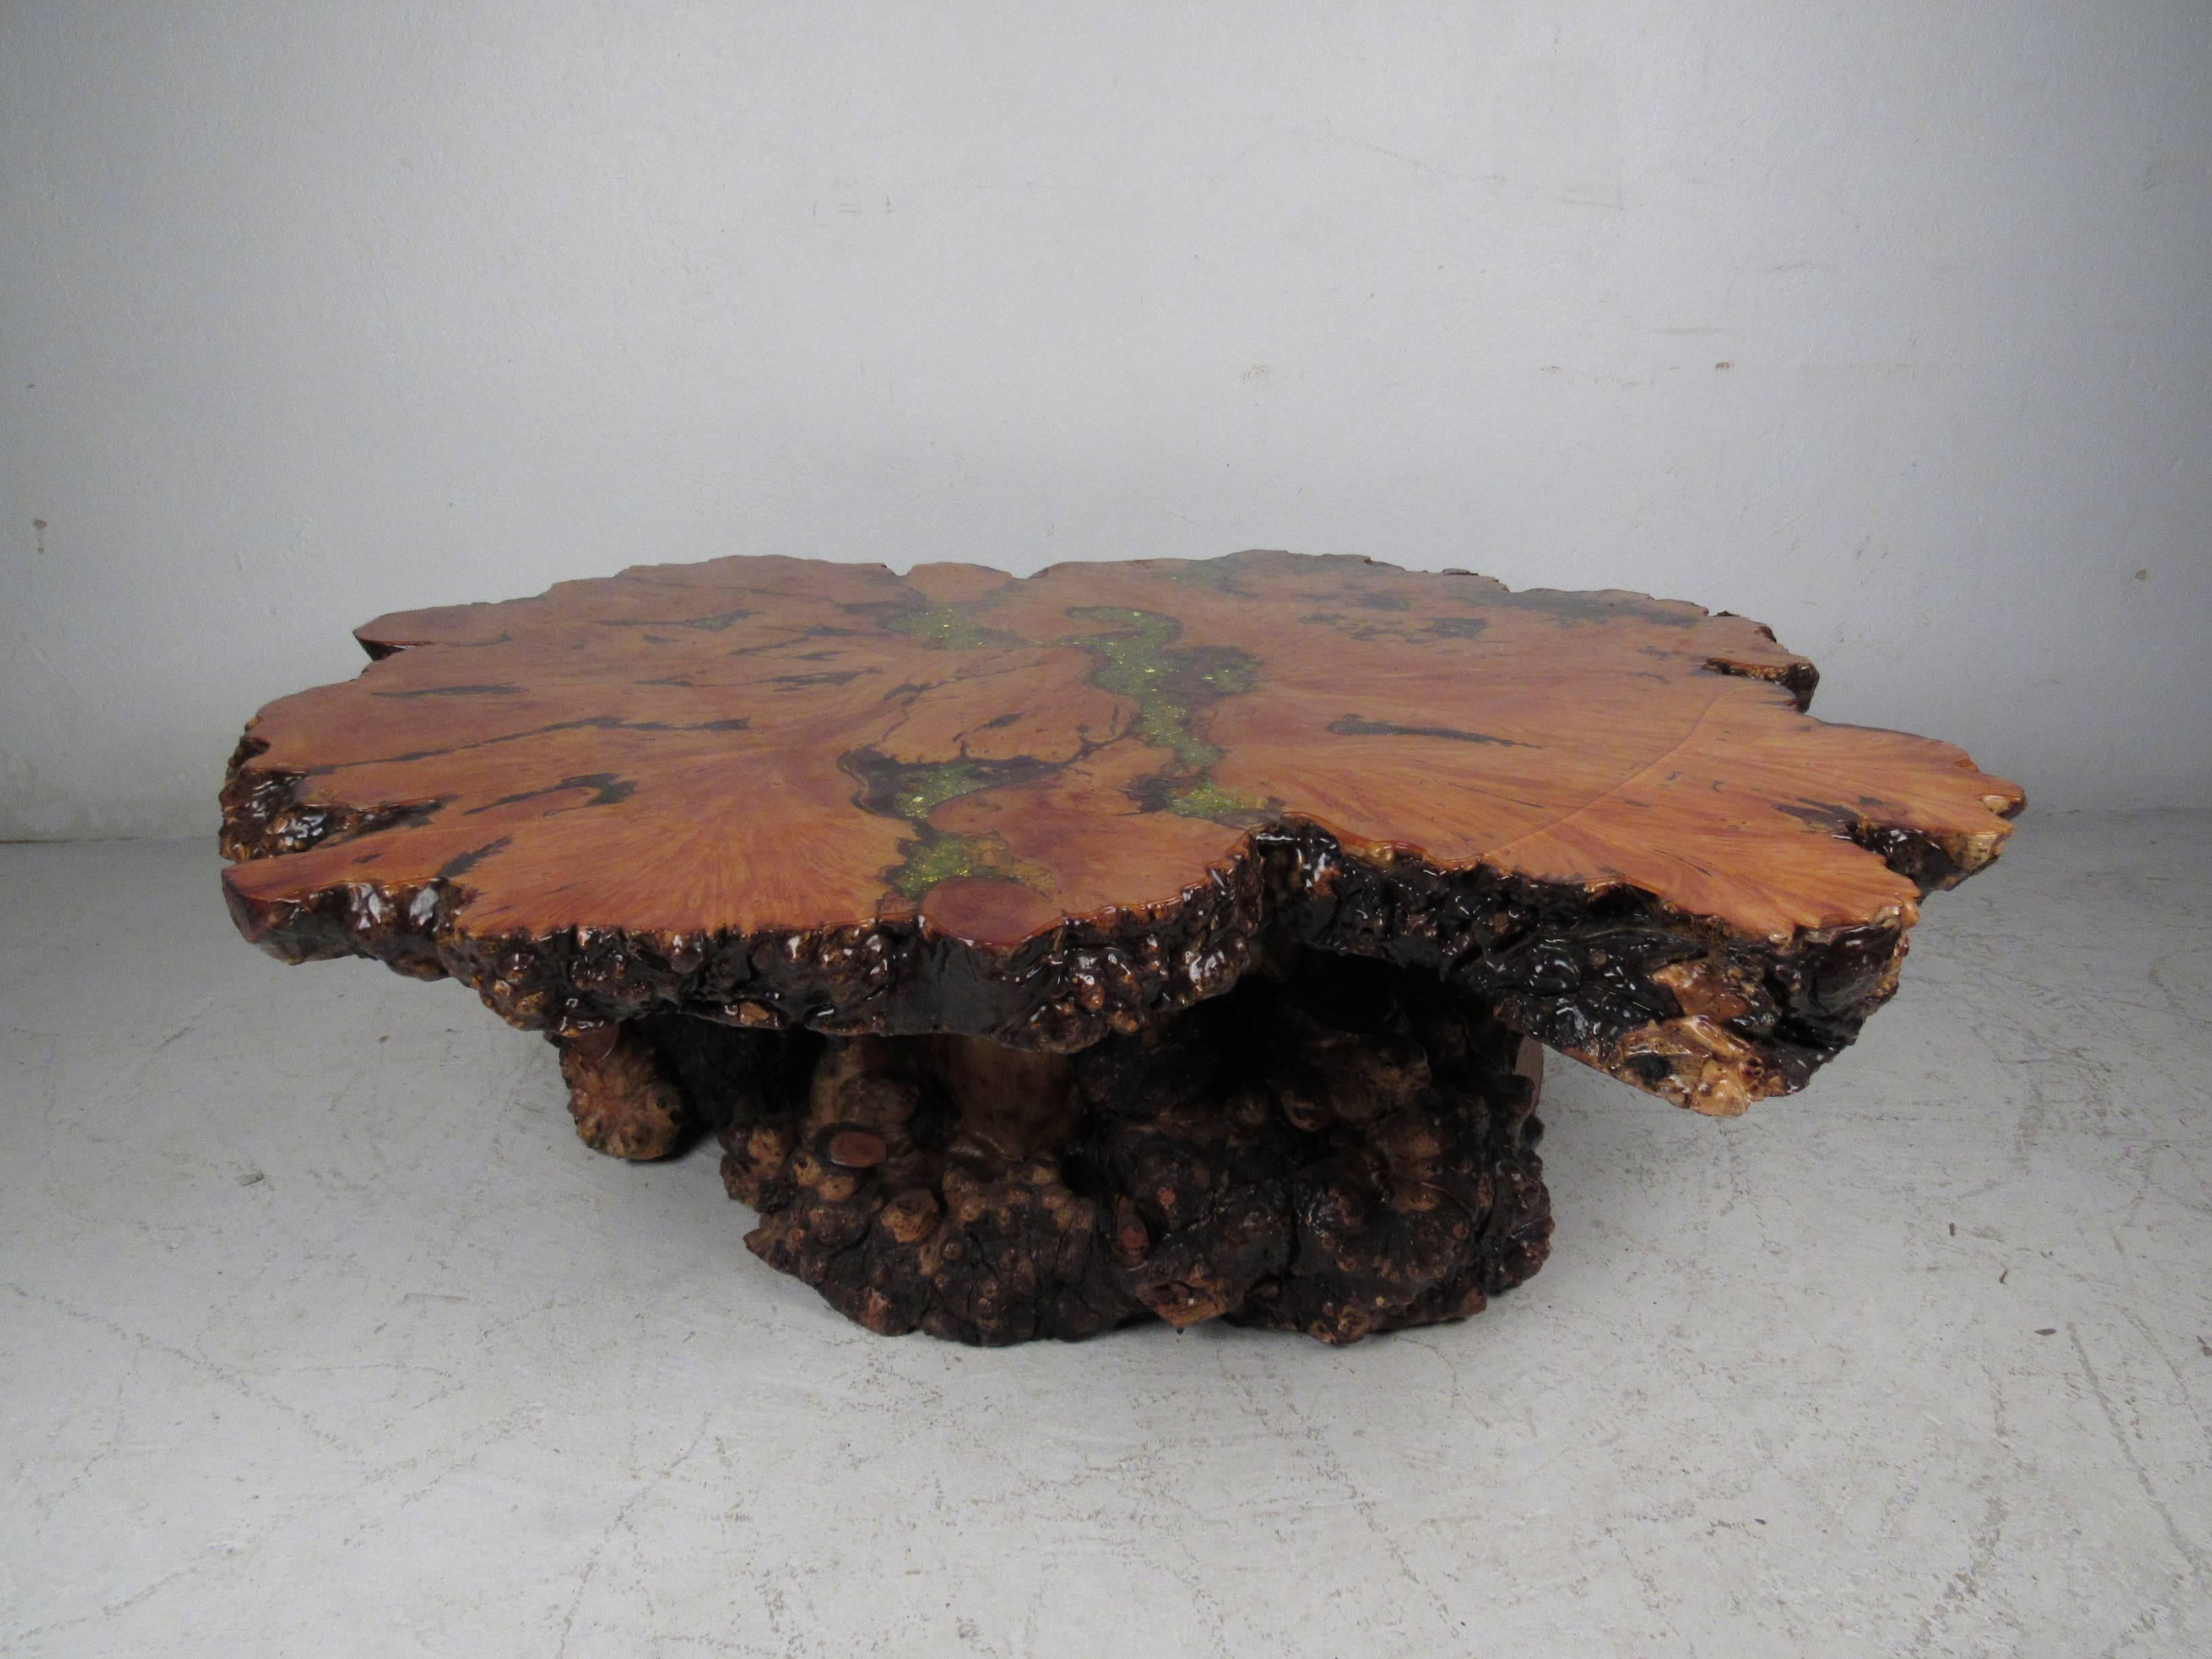 This beautiful vintage tree slab coffee table has pockets filled with specimen minerals and a thick resin finish. An unusual live edge top, intertwining root base, and elaborate colors make this piece the perfect addition to any modern interior.